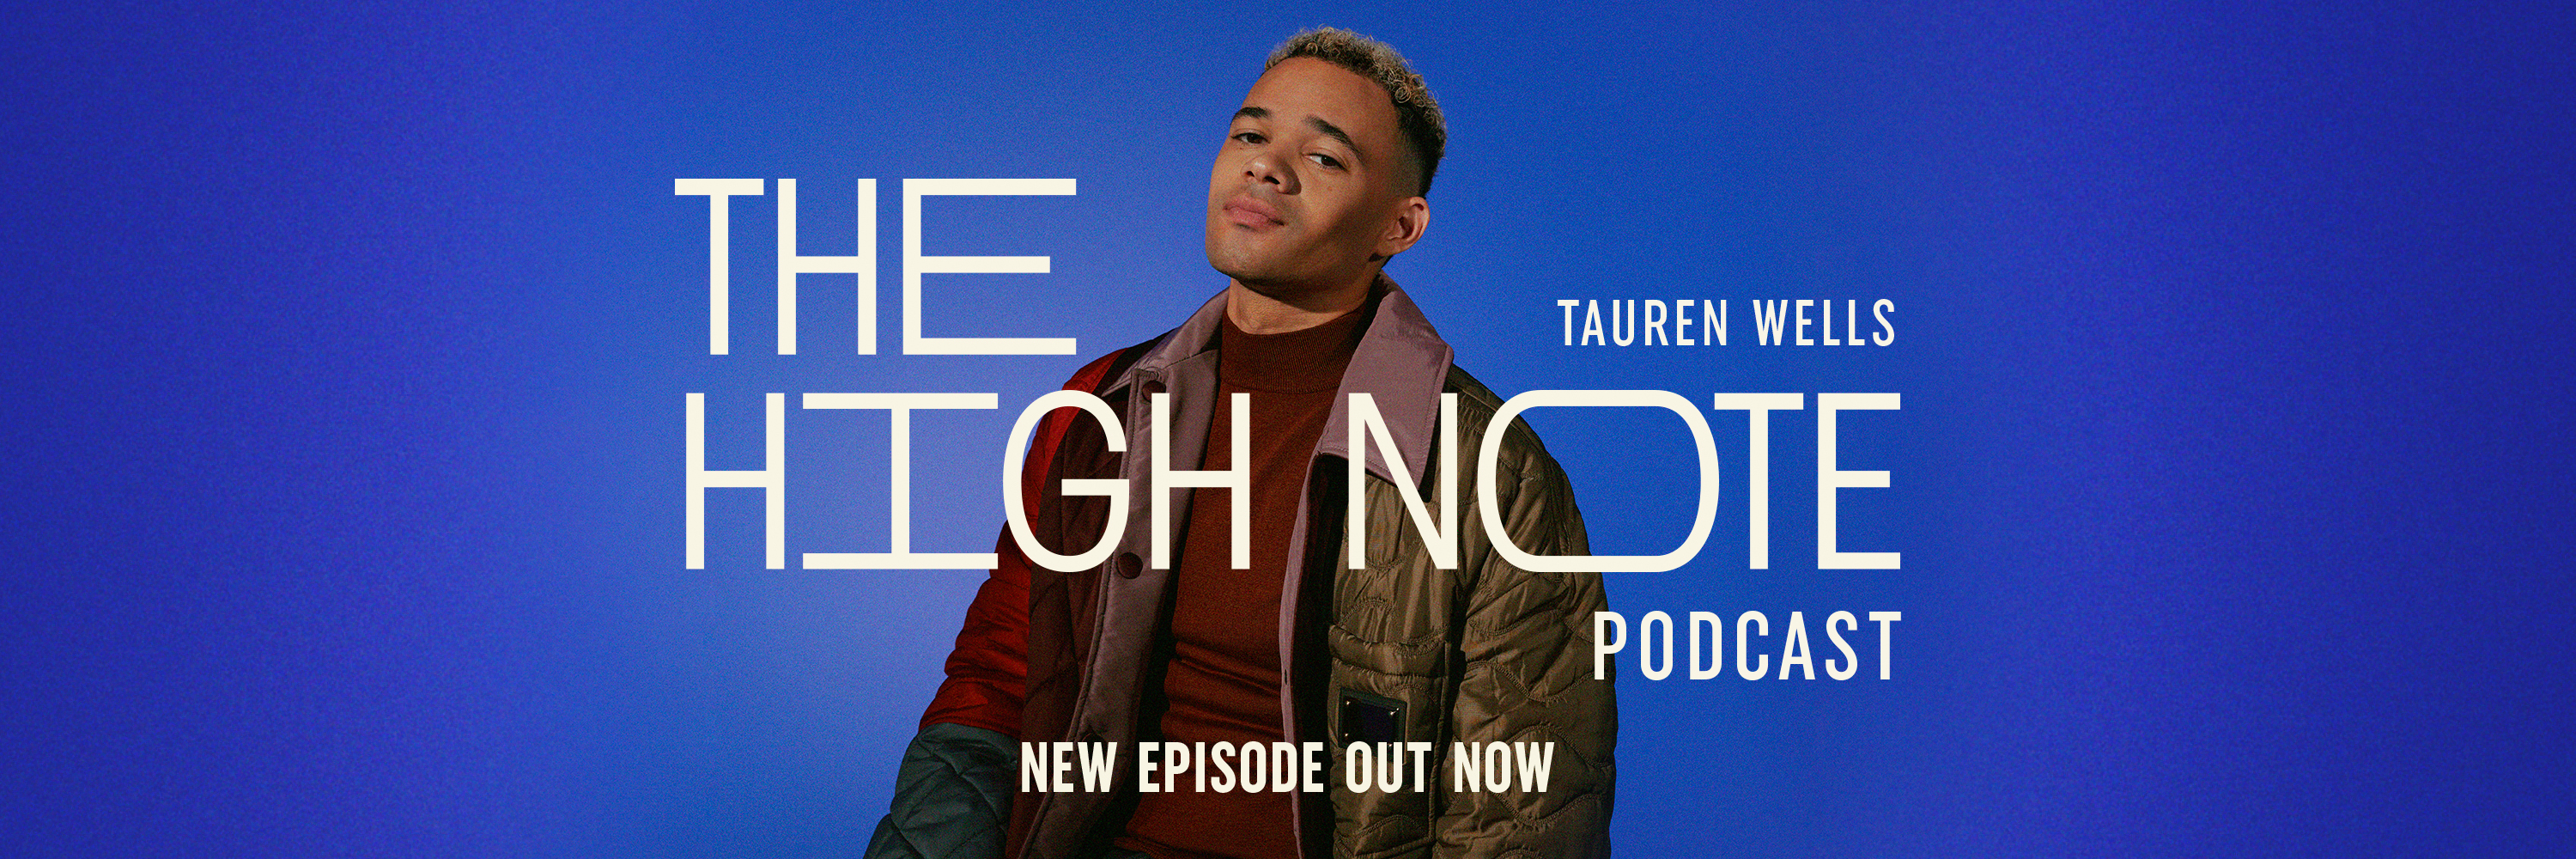 The High Note S2 - New Episode Out Now